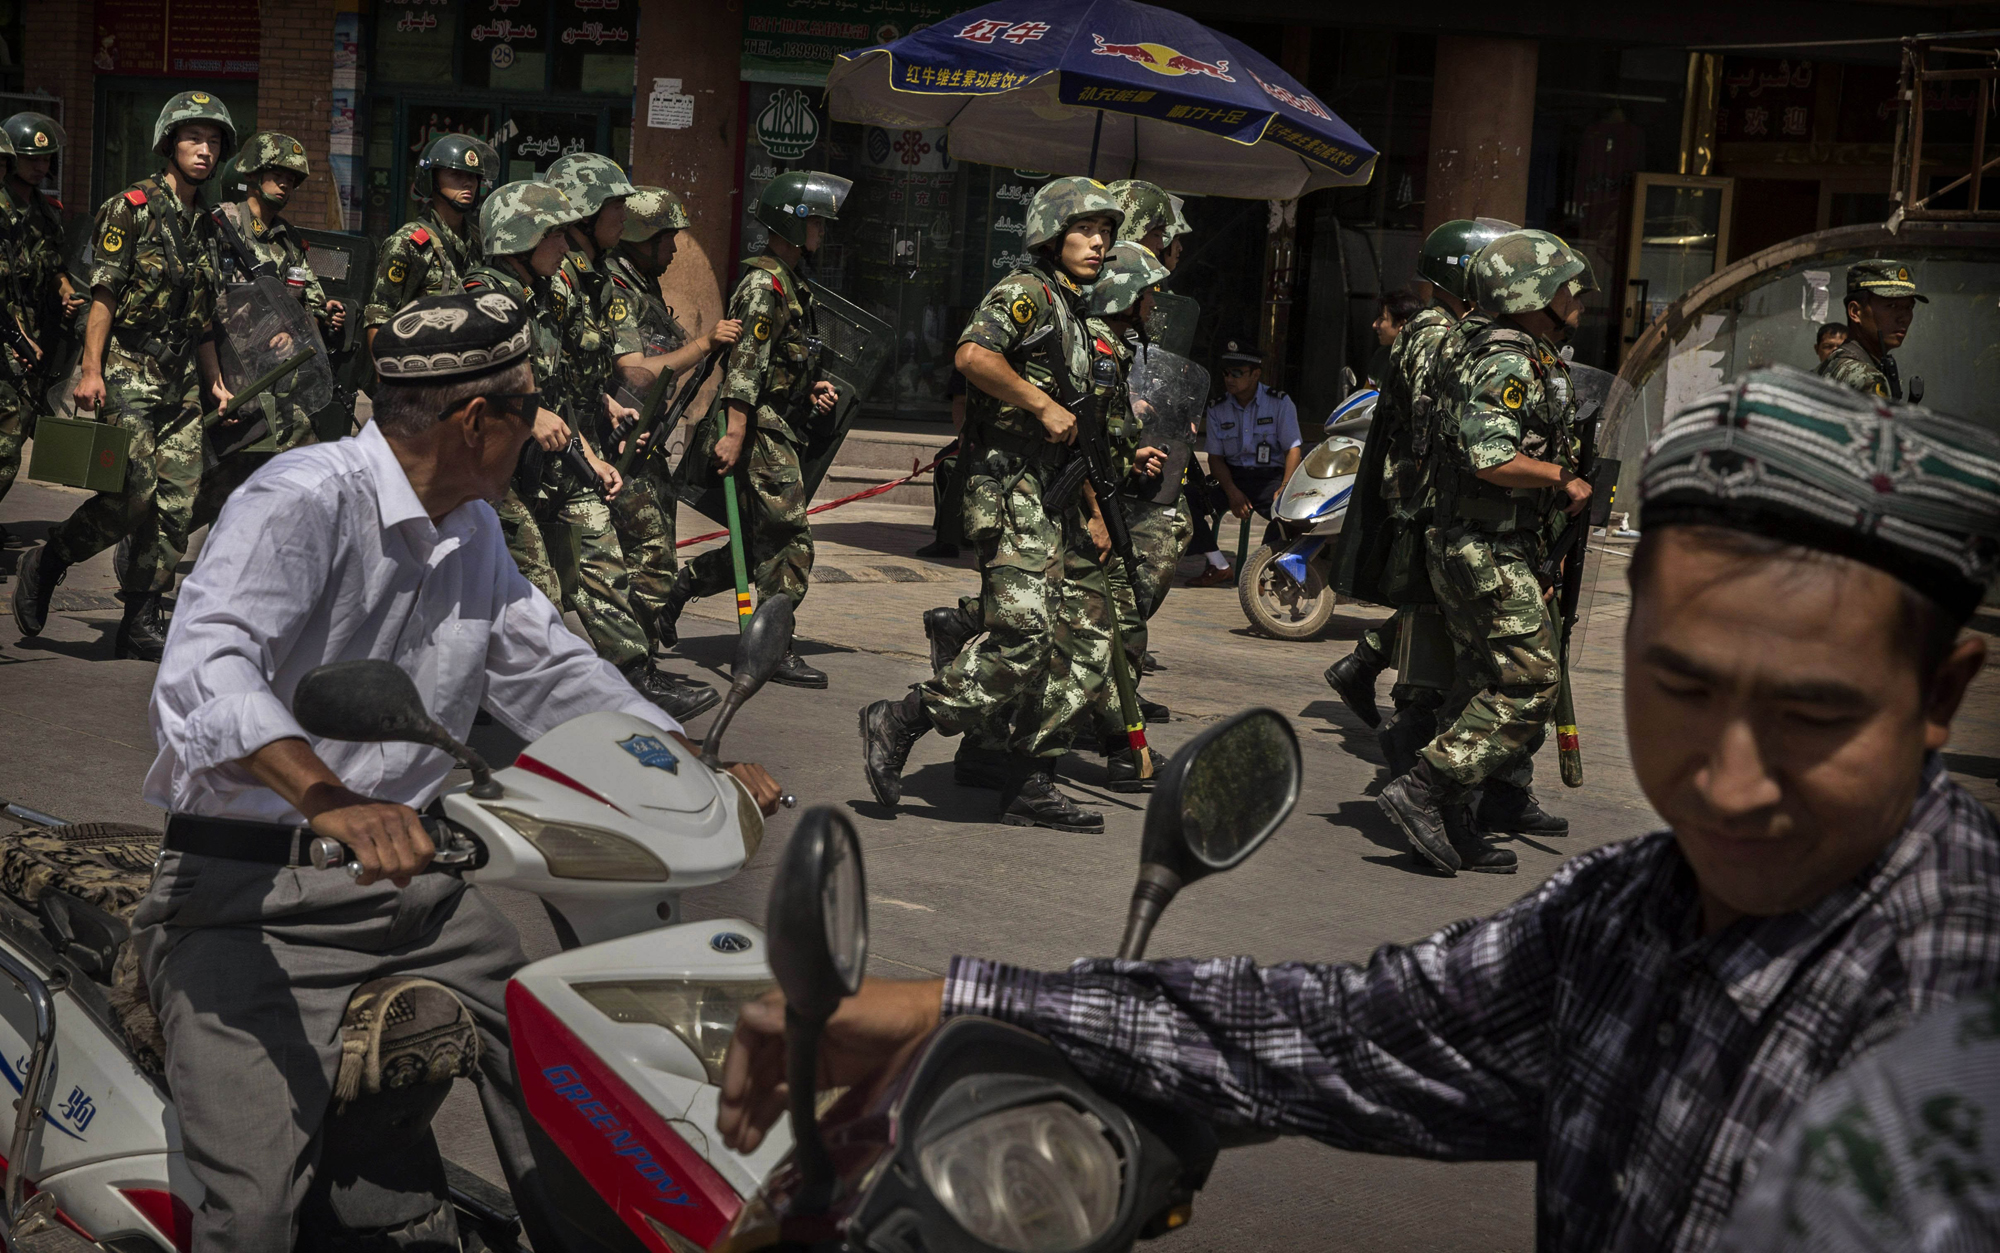 Chinese soldiers patrol in Kashgar, in Xinjiang Uighur Autonomous Region, on July 30, 2014 (Kevin Frayer—Getty Images)